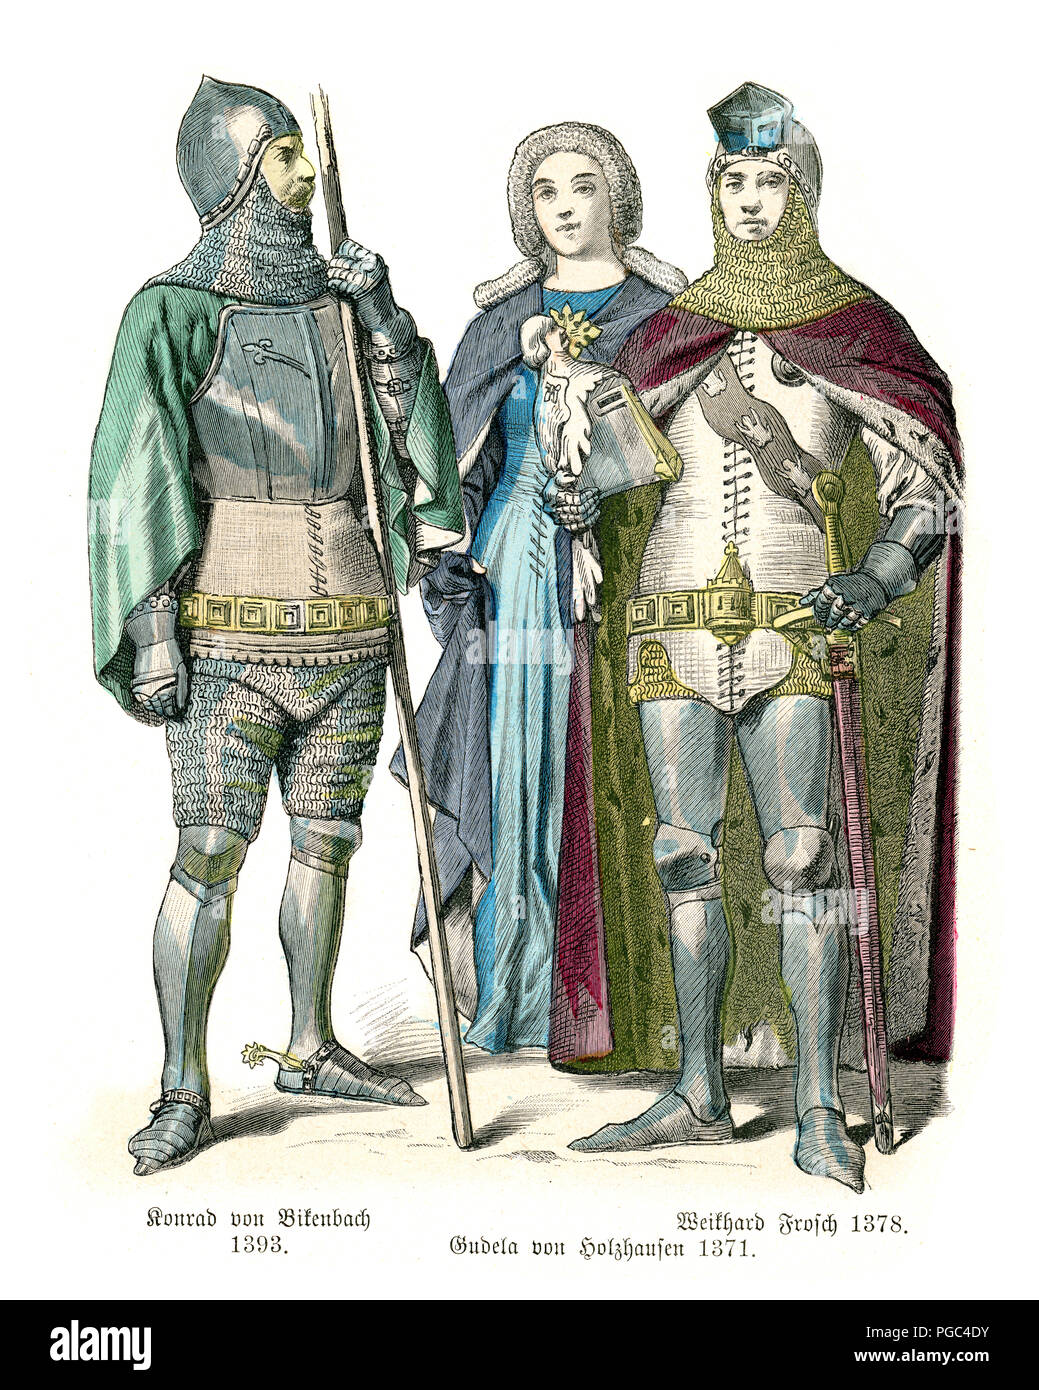 Fashions of Medieval Germany, Knights and Lady, 14th Century. Conrad von Rikenbach, Gudela von Holzhausen and Weikhard Frosch Stock Photo